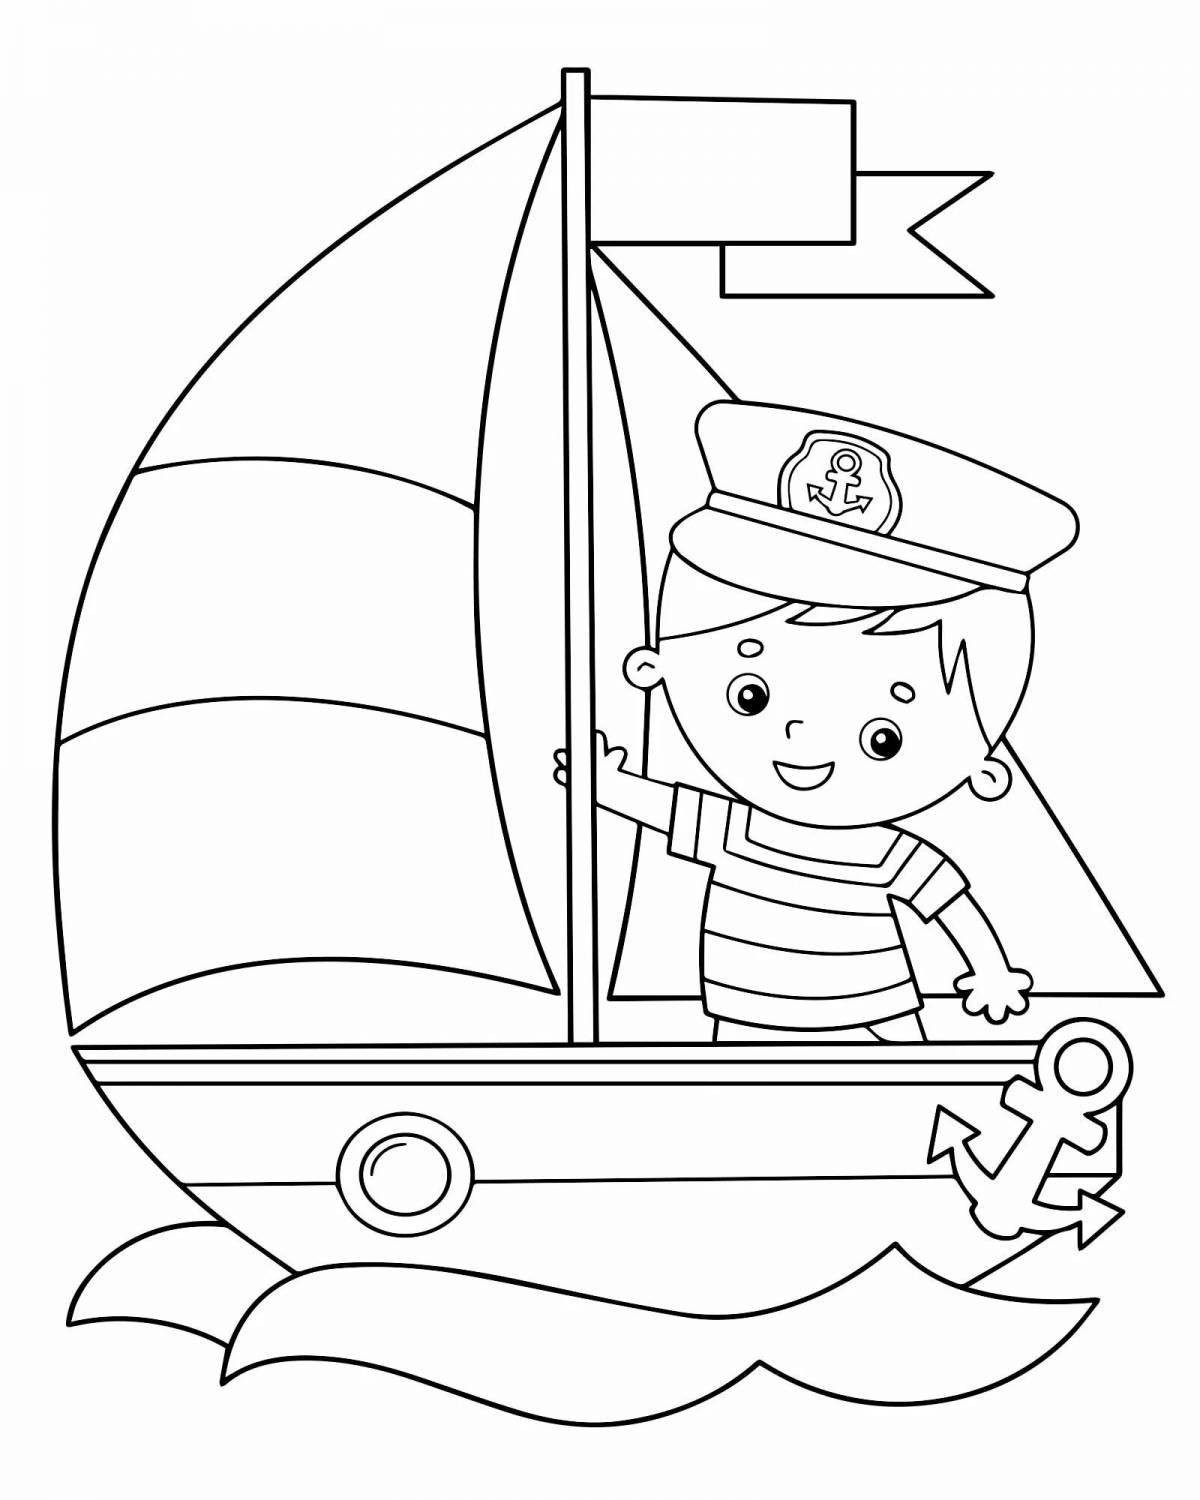 Coloring book shining captain of the ship